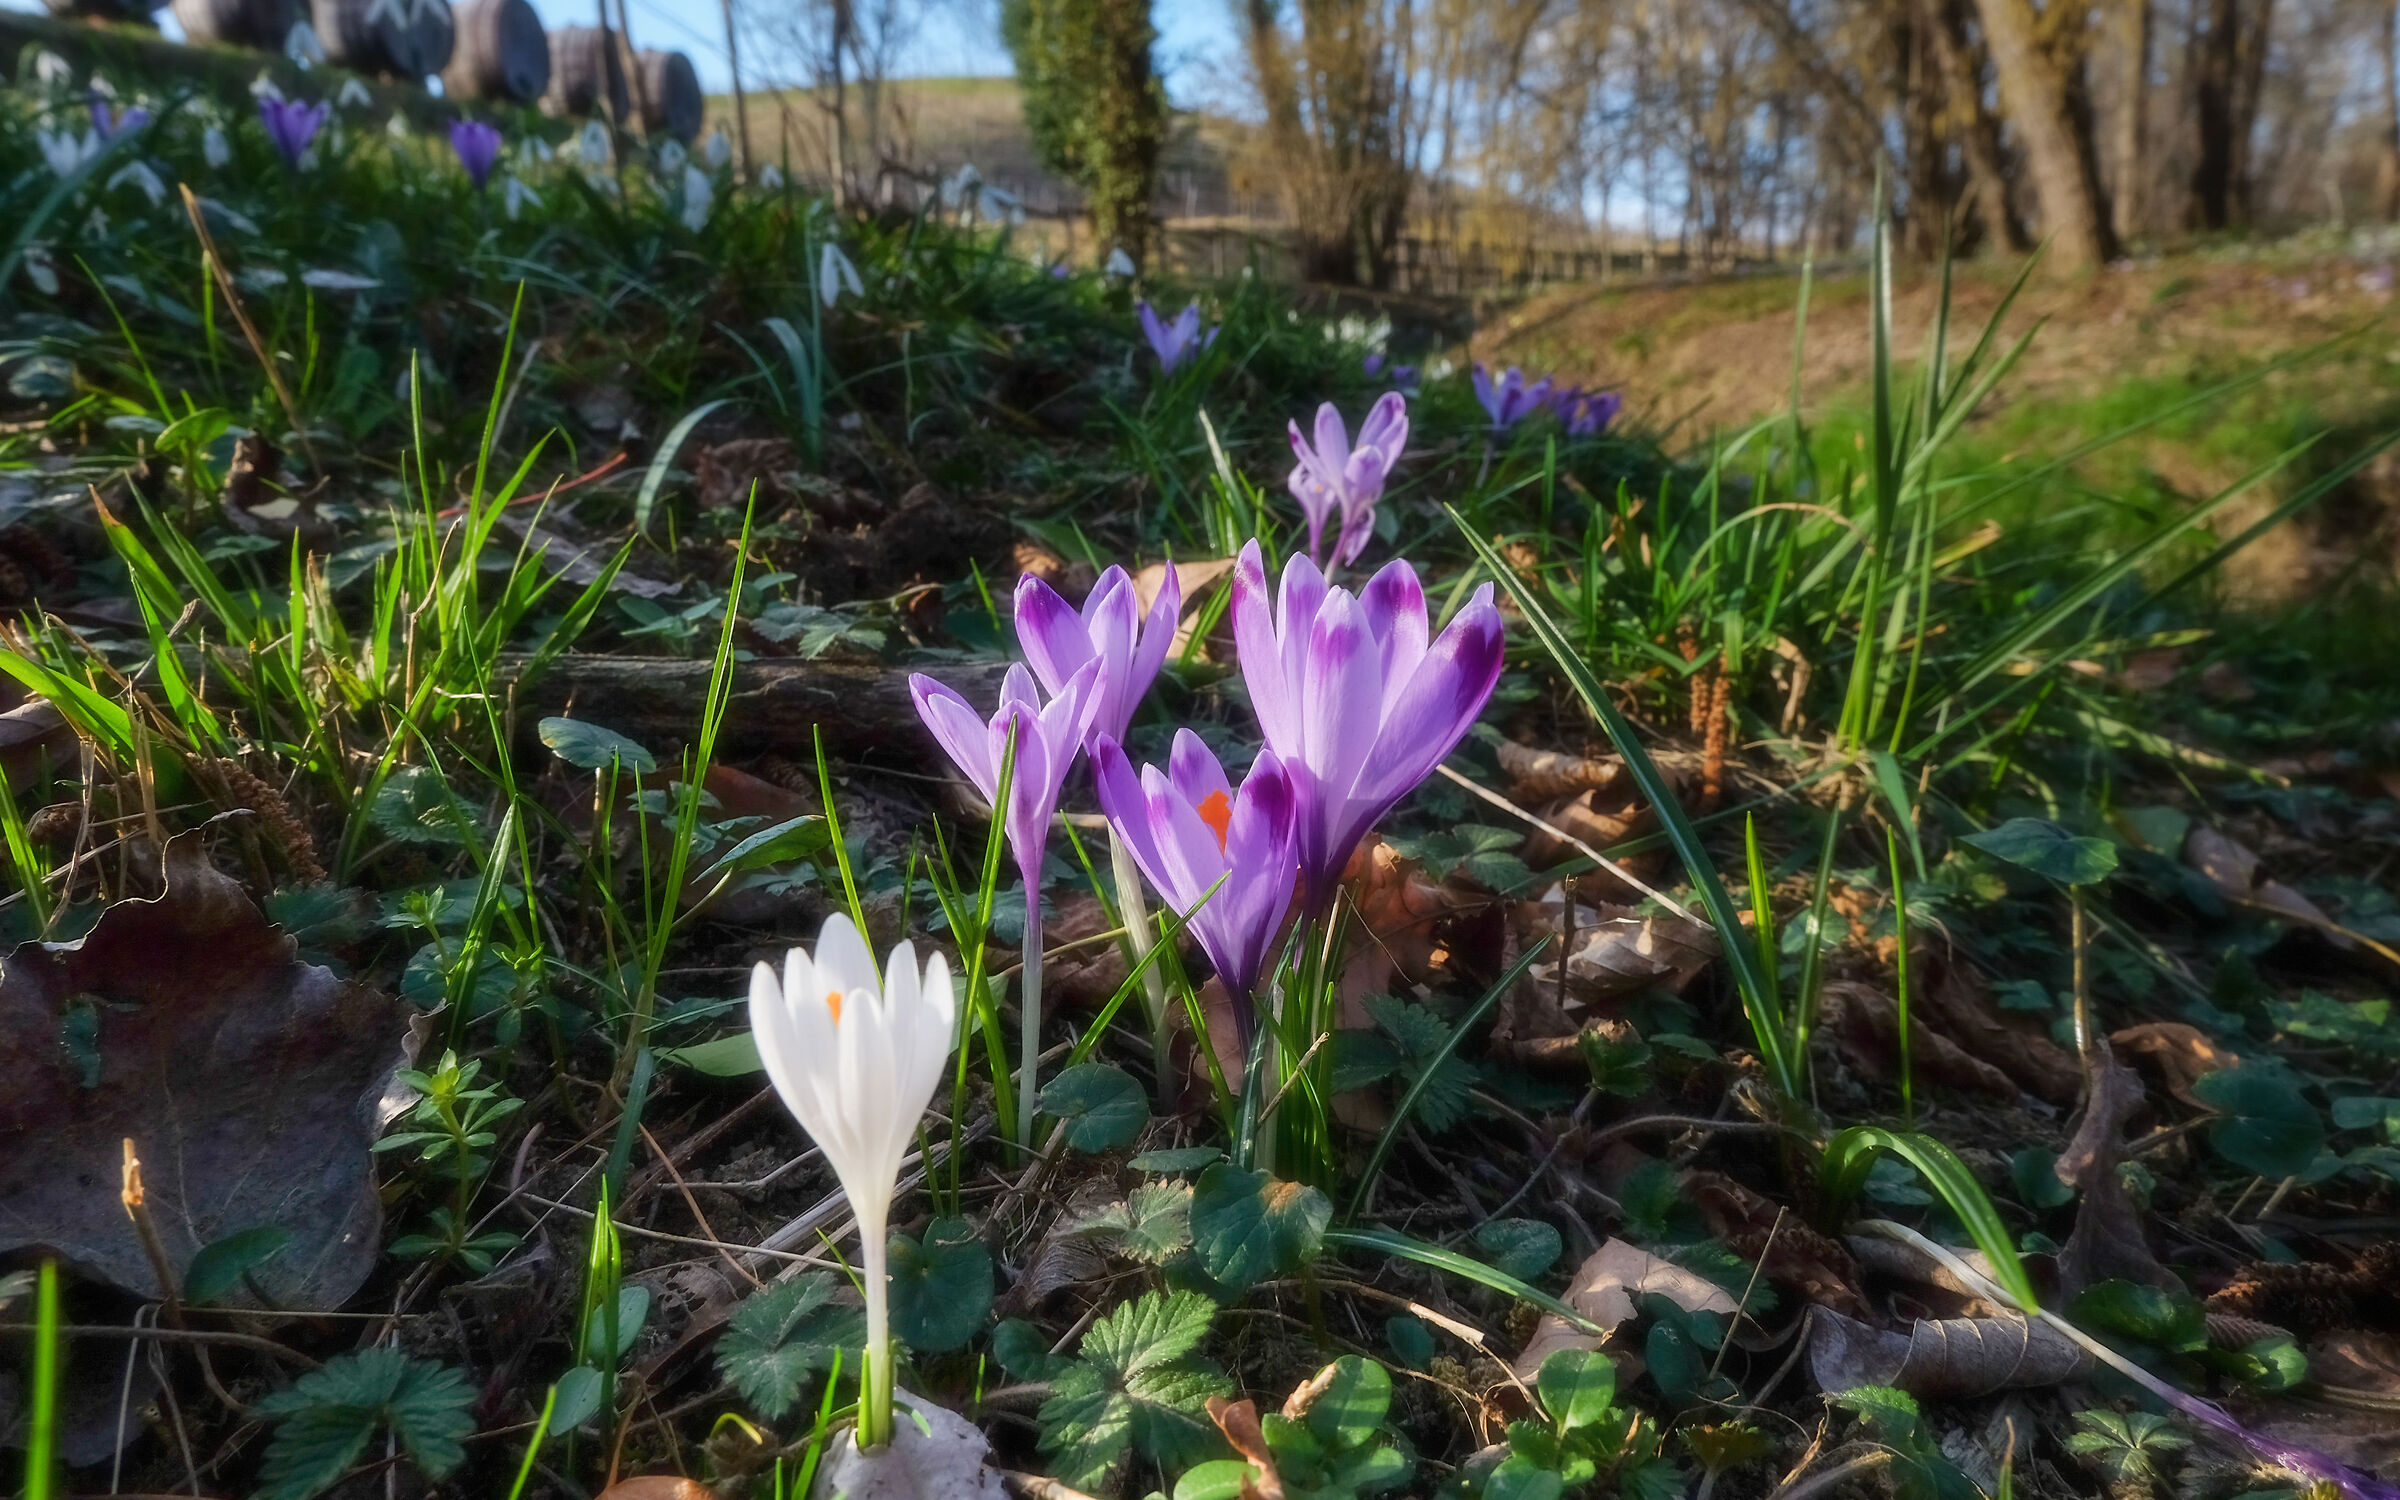 Even crocuses have their own reason ...